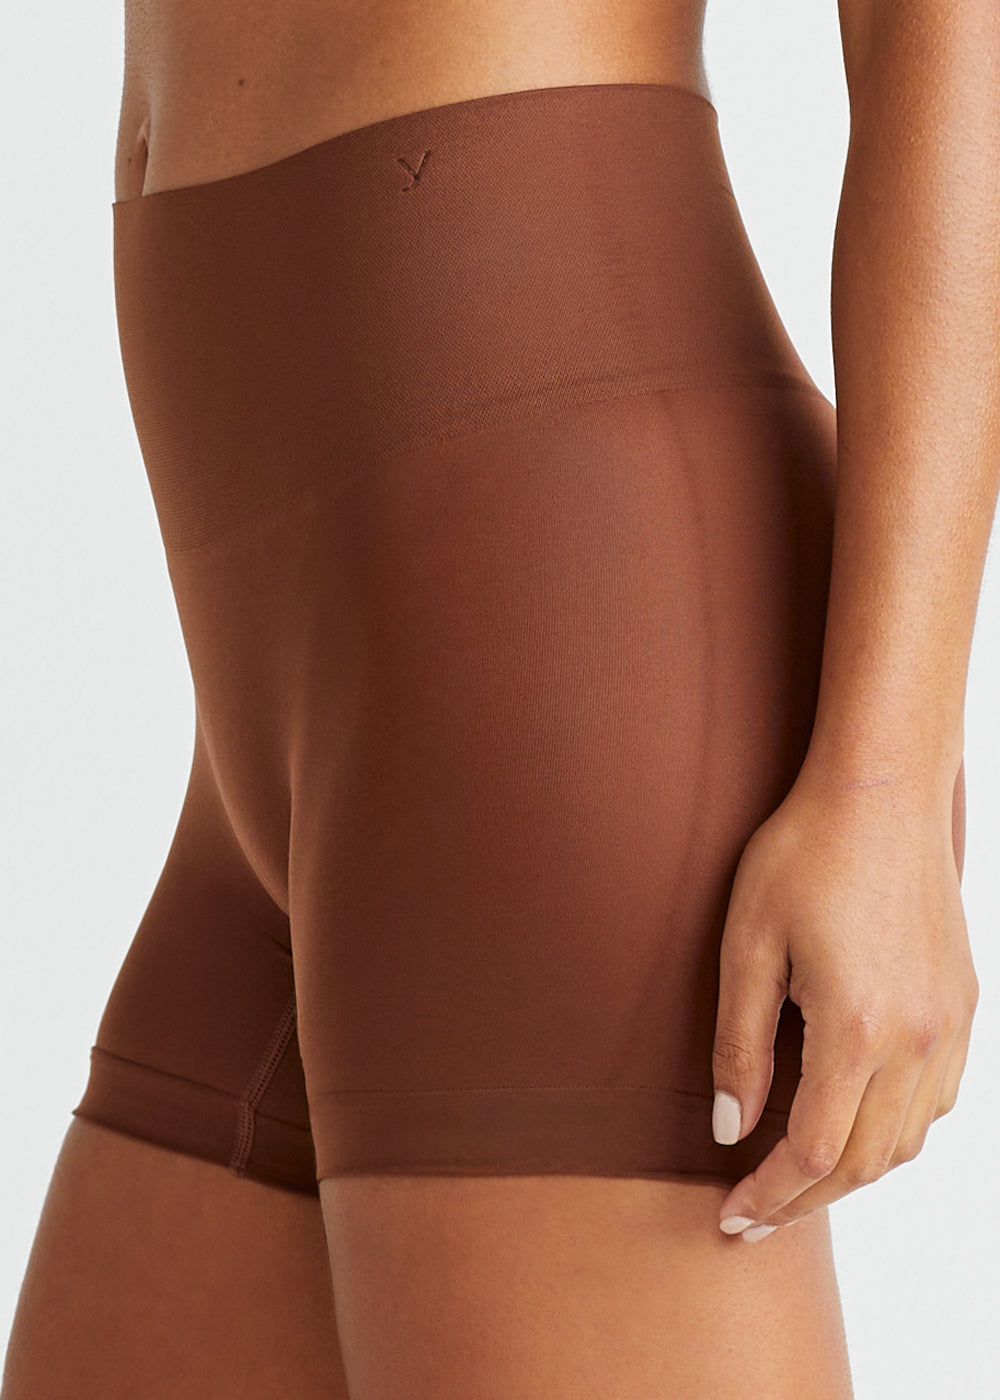 Ultralight Shaping Short - Seamless from Yummie in Copper Glow  - 1